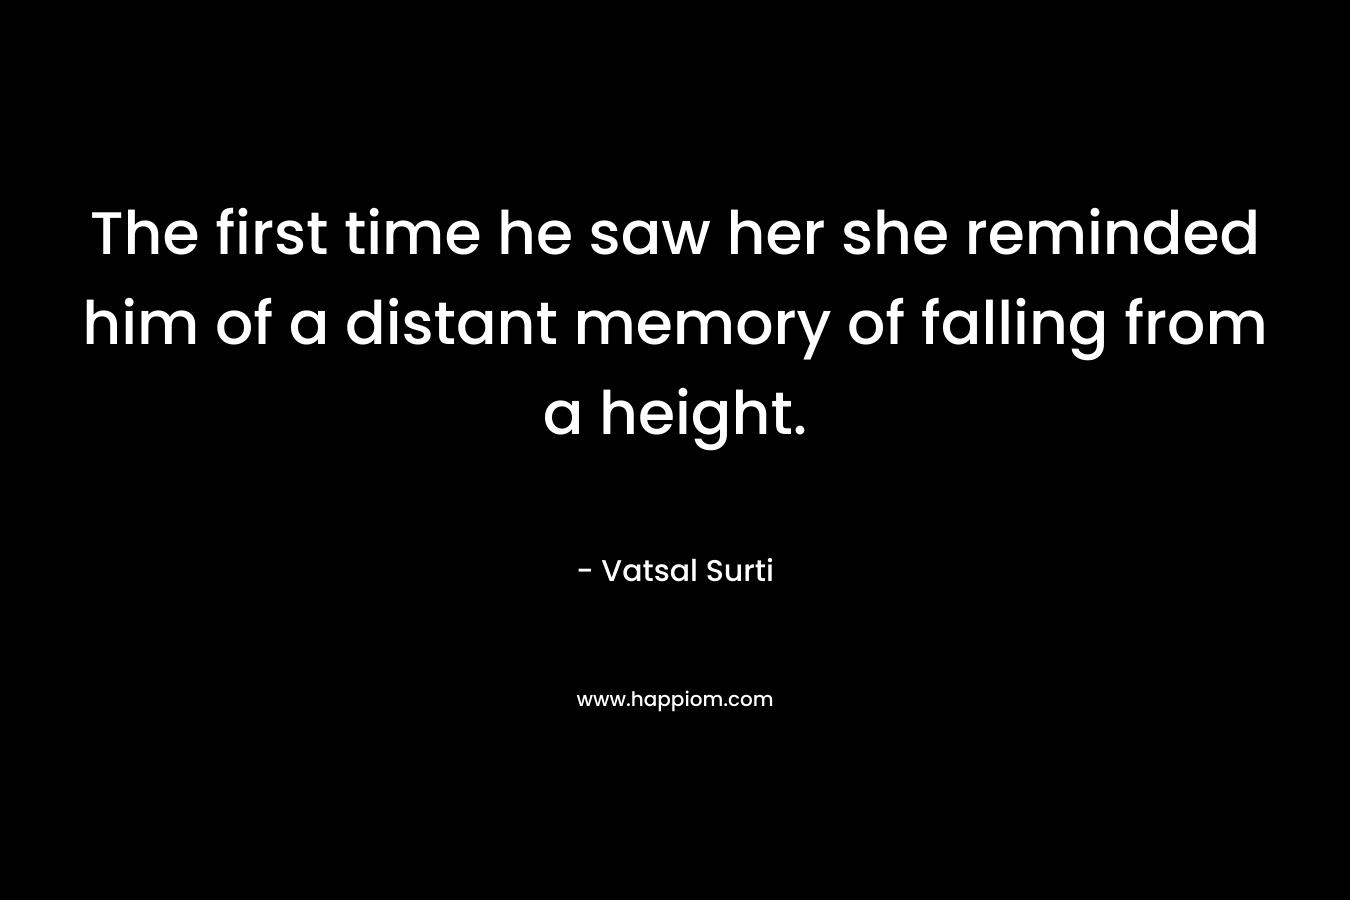 The first time he saw her she reminded him of a distant memory of falling from a height. – Vatsal Surti